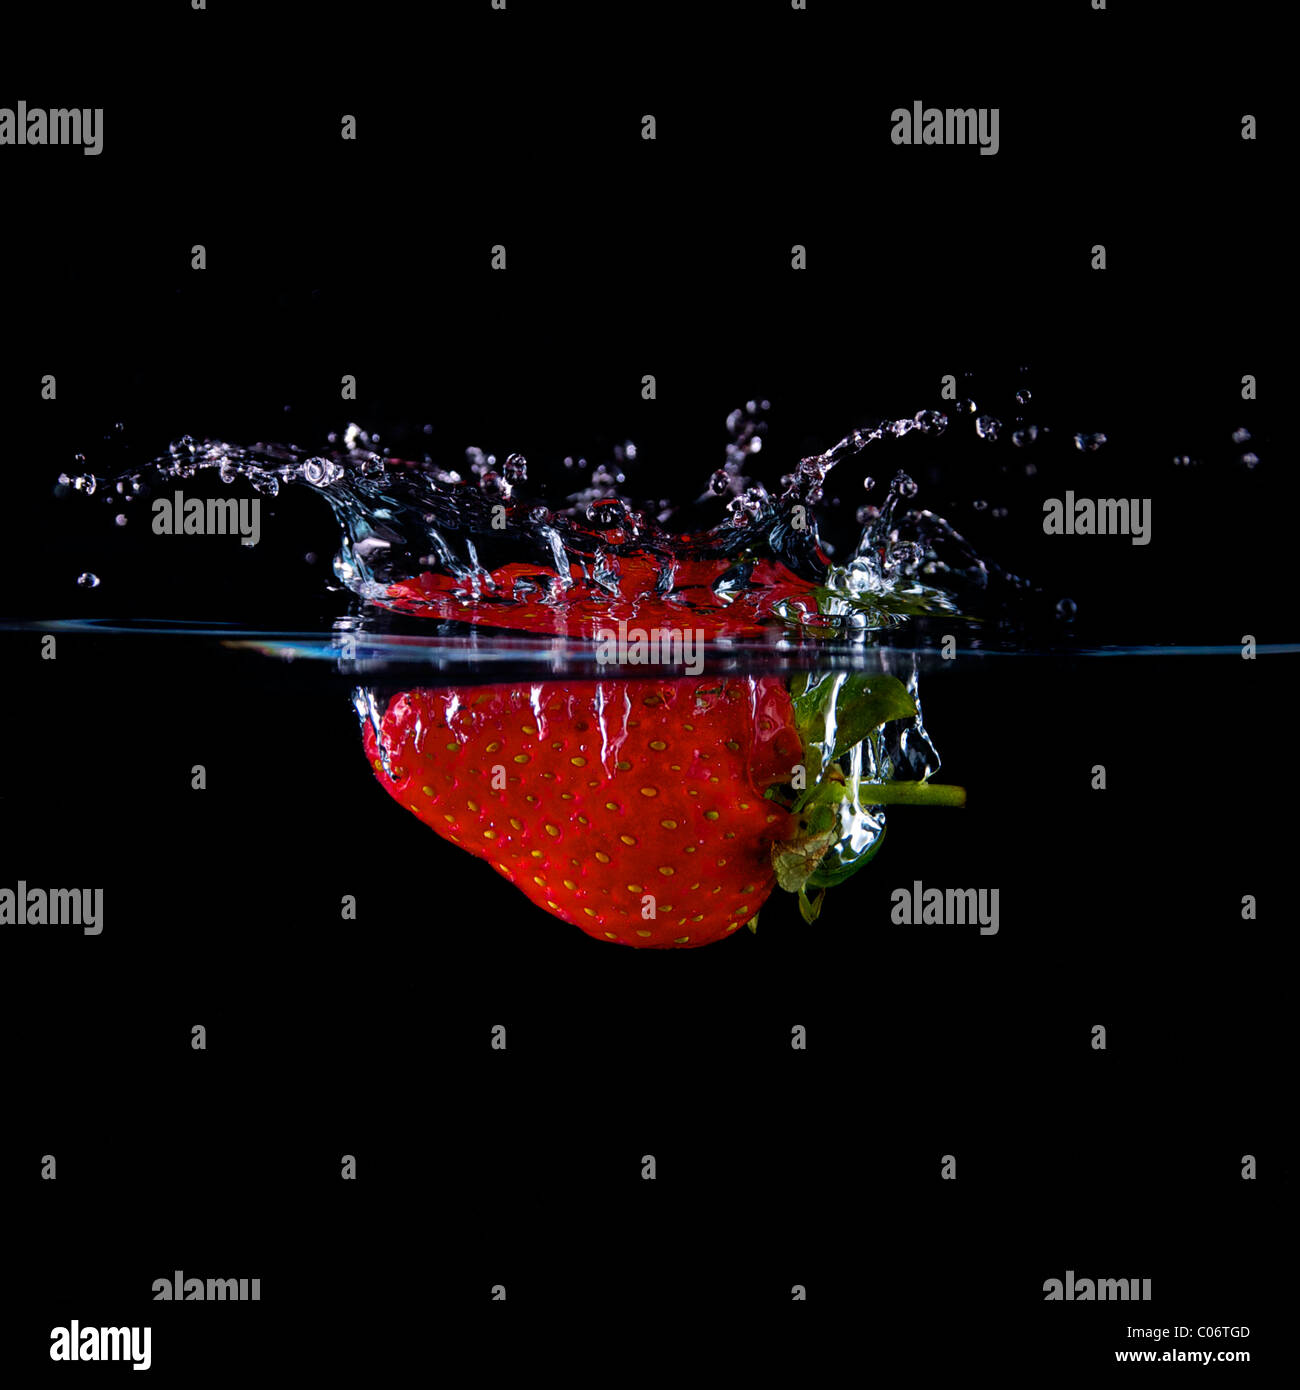 A Strawberry dropped into water creating a splash with black background Stock Photo